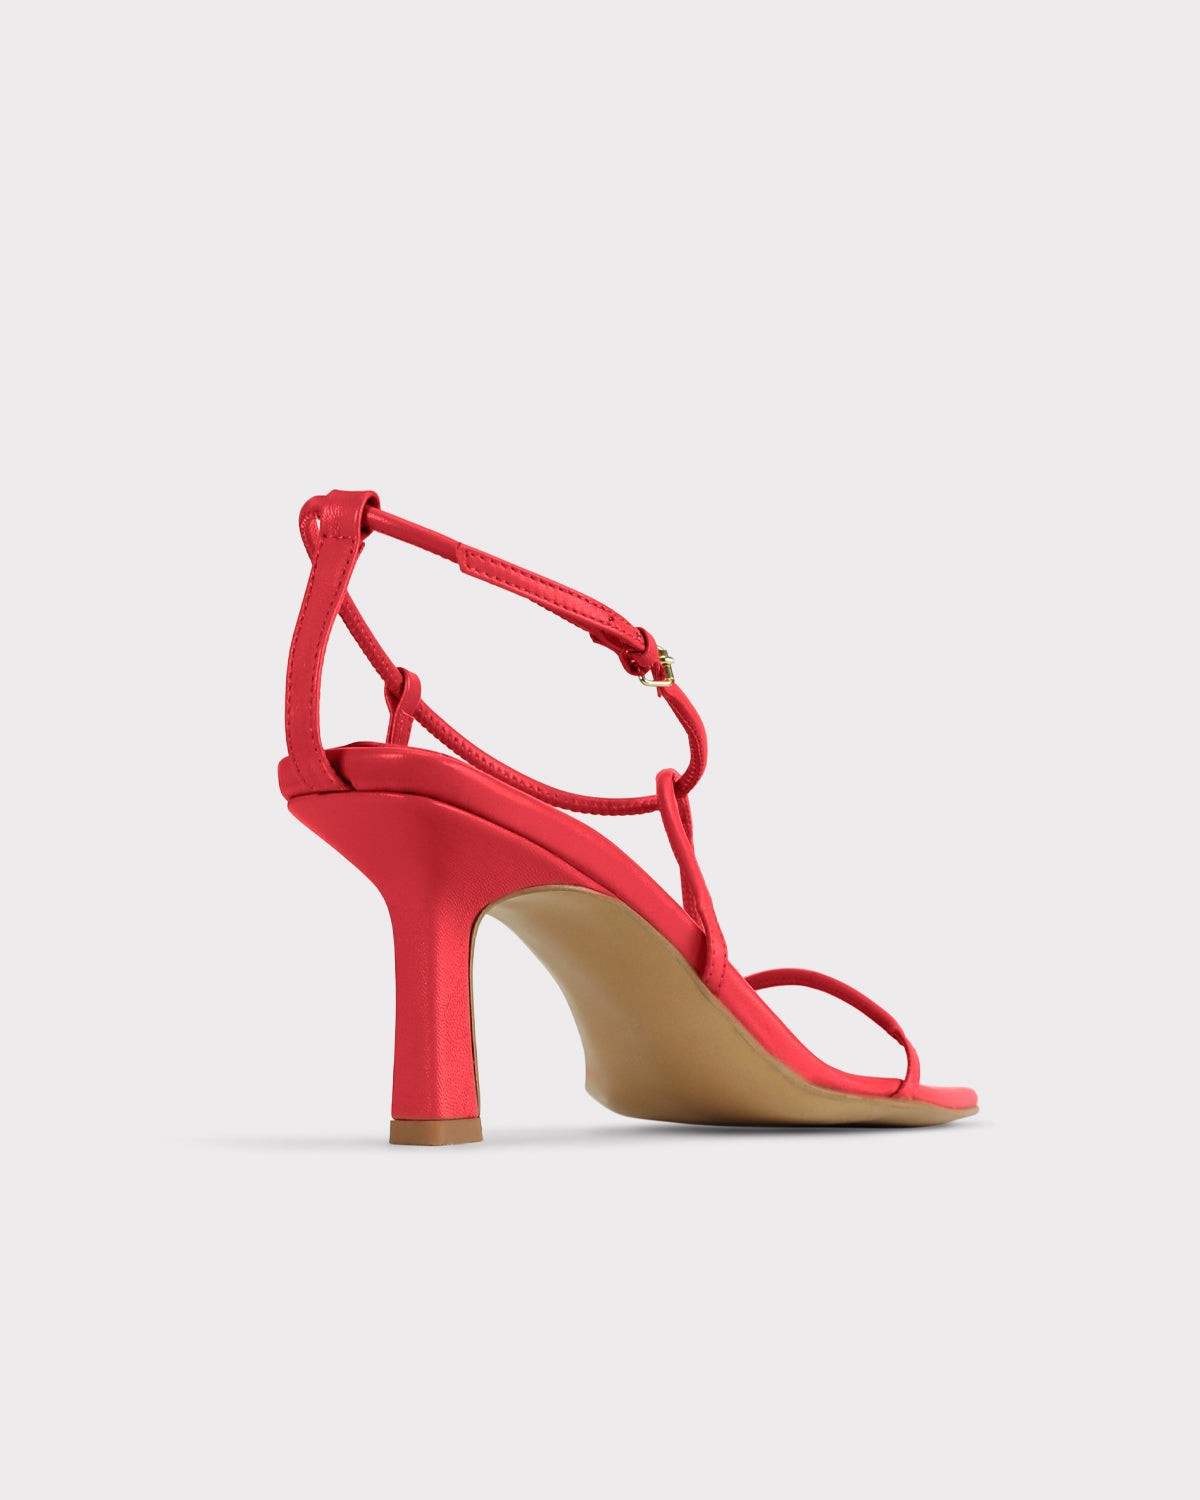 The Strappy Sandal - Red